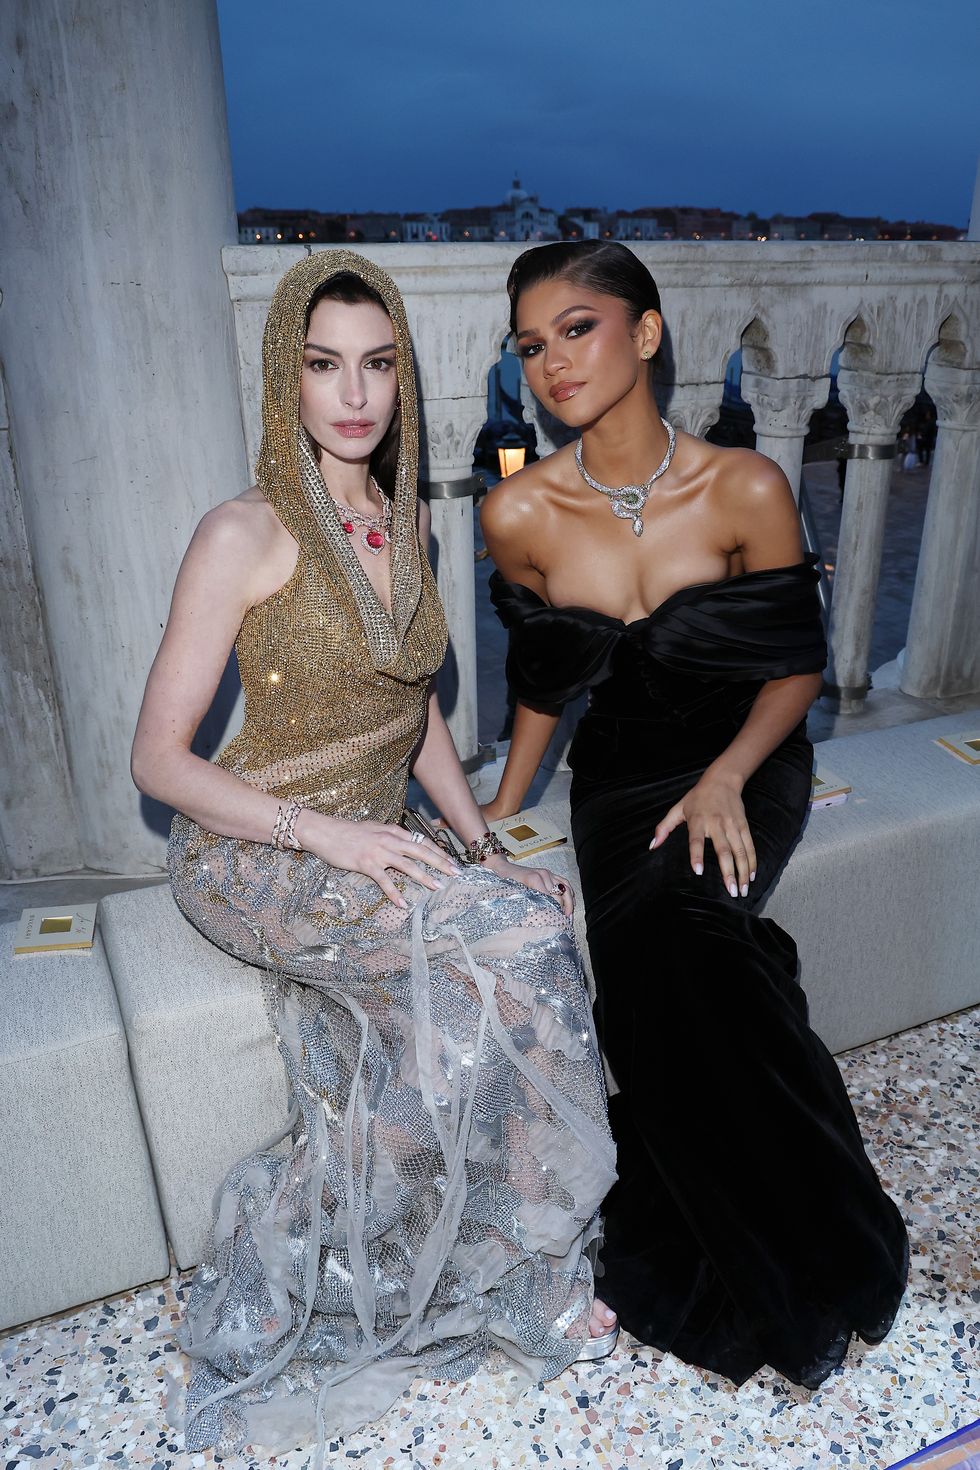 venice, italy may 16 anne hathaway and zendaya attend the bulgari mediterranea high jewelry event at palazzo ducale on may 16, 2023 in venice photo by pietro s dapranogetty images for bulgari